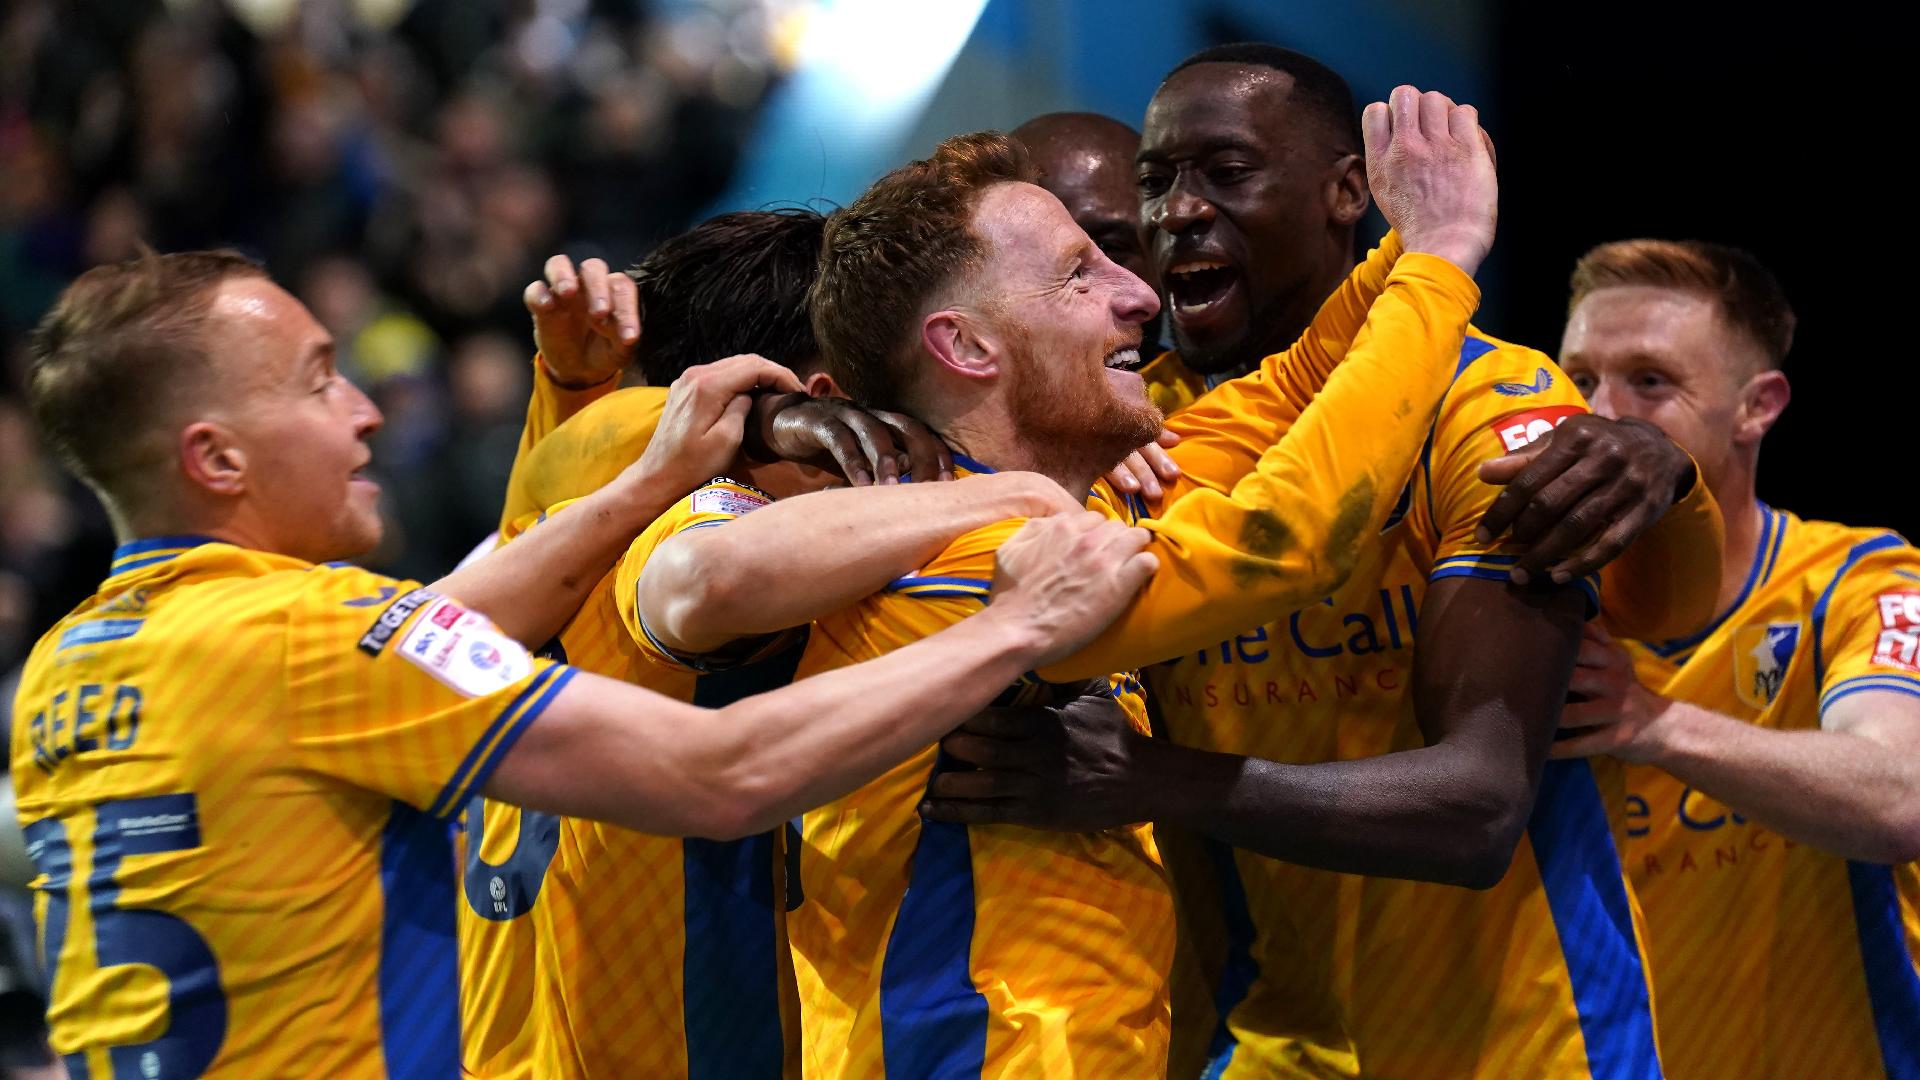 Mansfield clinch promotion with win over Accrington